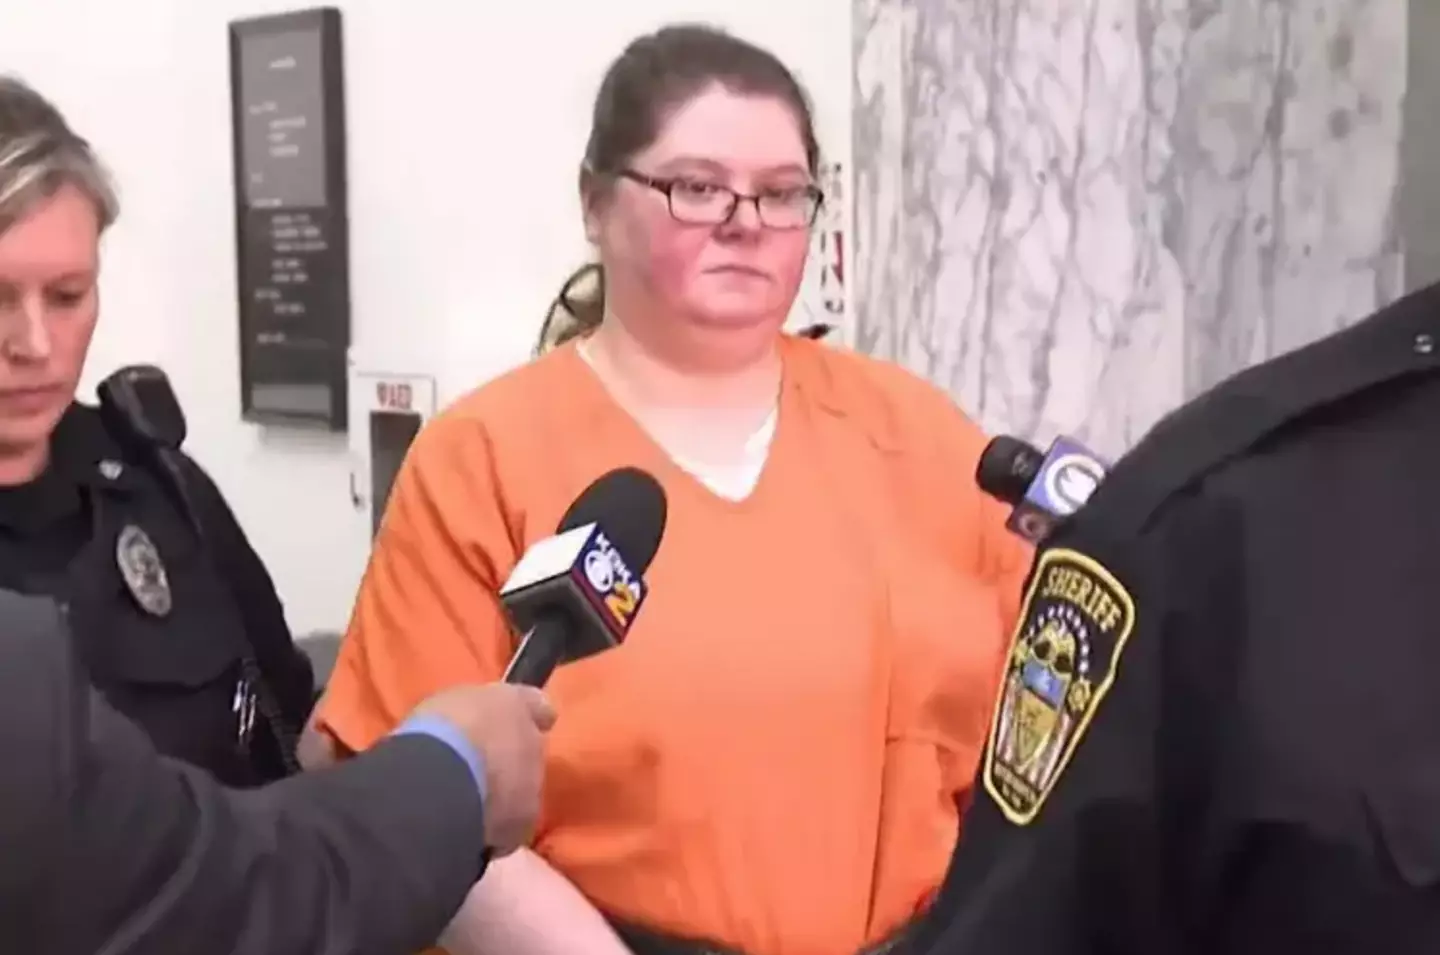 The former nurse killed at least 17 people by injecting them with lethal doses of insulin (CBS PITTSBURGH/YouTube)